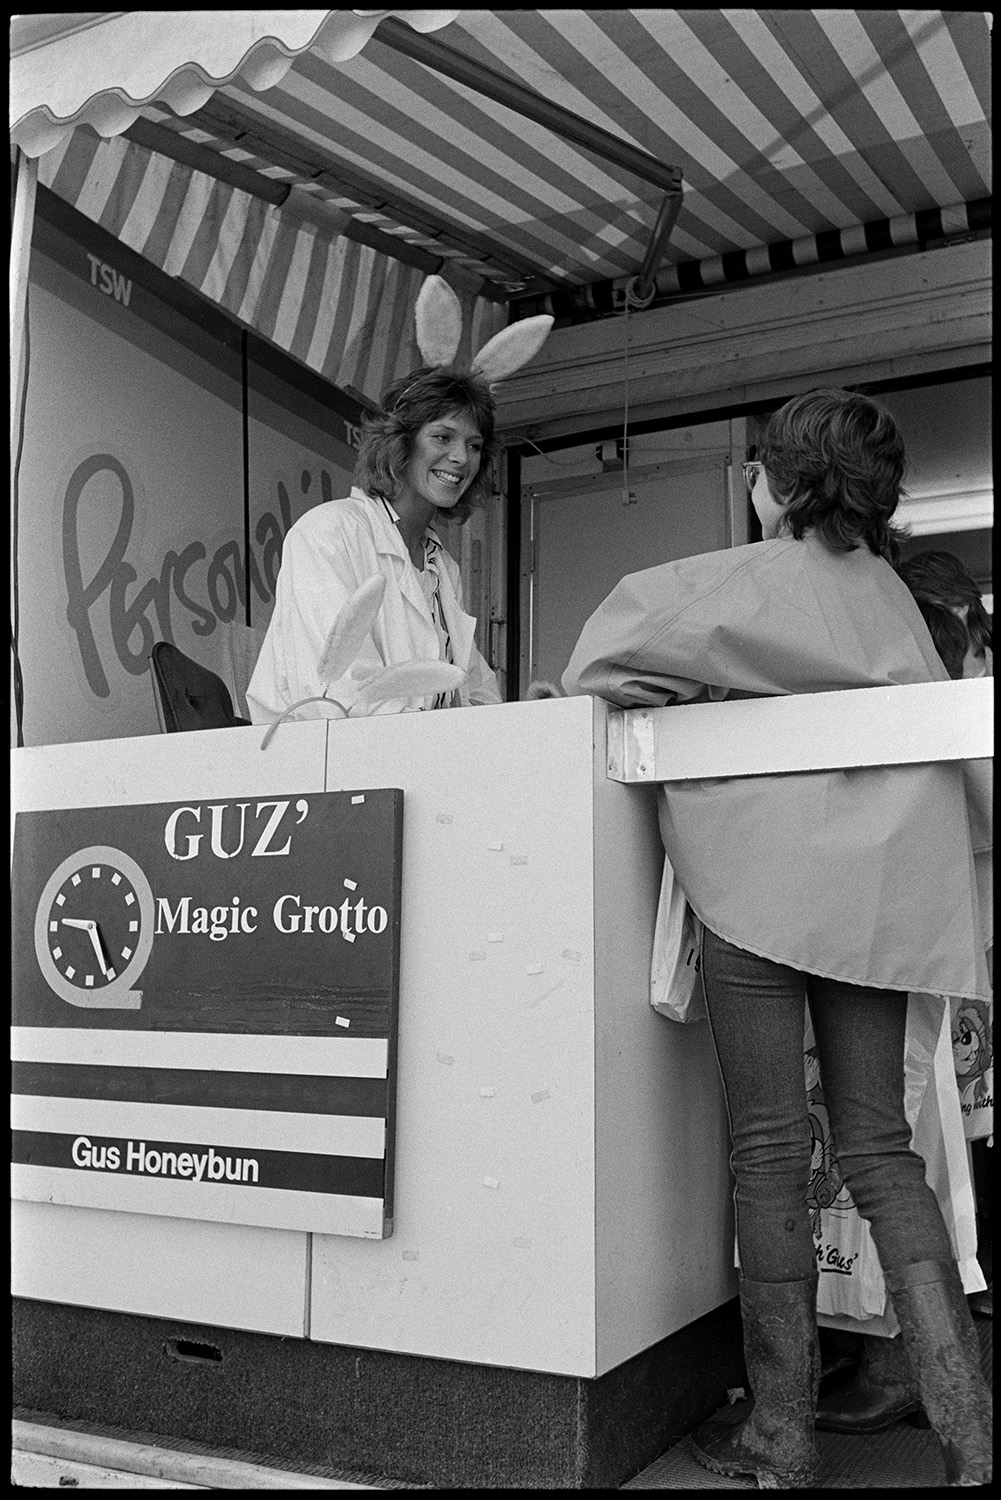 Agricultural show, prize sheep, exhibition, TV tent.
[Entrance to the Gus Honeybun tent at the North Devon Show in Alverdiscott. A television presenter wearing rabbit ears is talking to a visitor. Signs for TSW and Magic Grotto are at the tent entrance.]